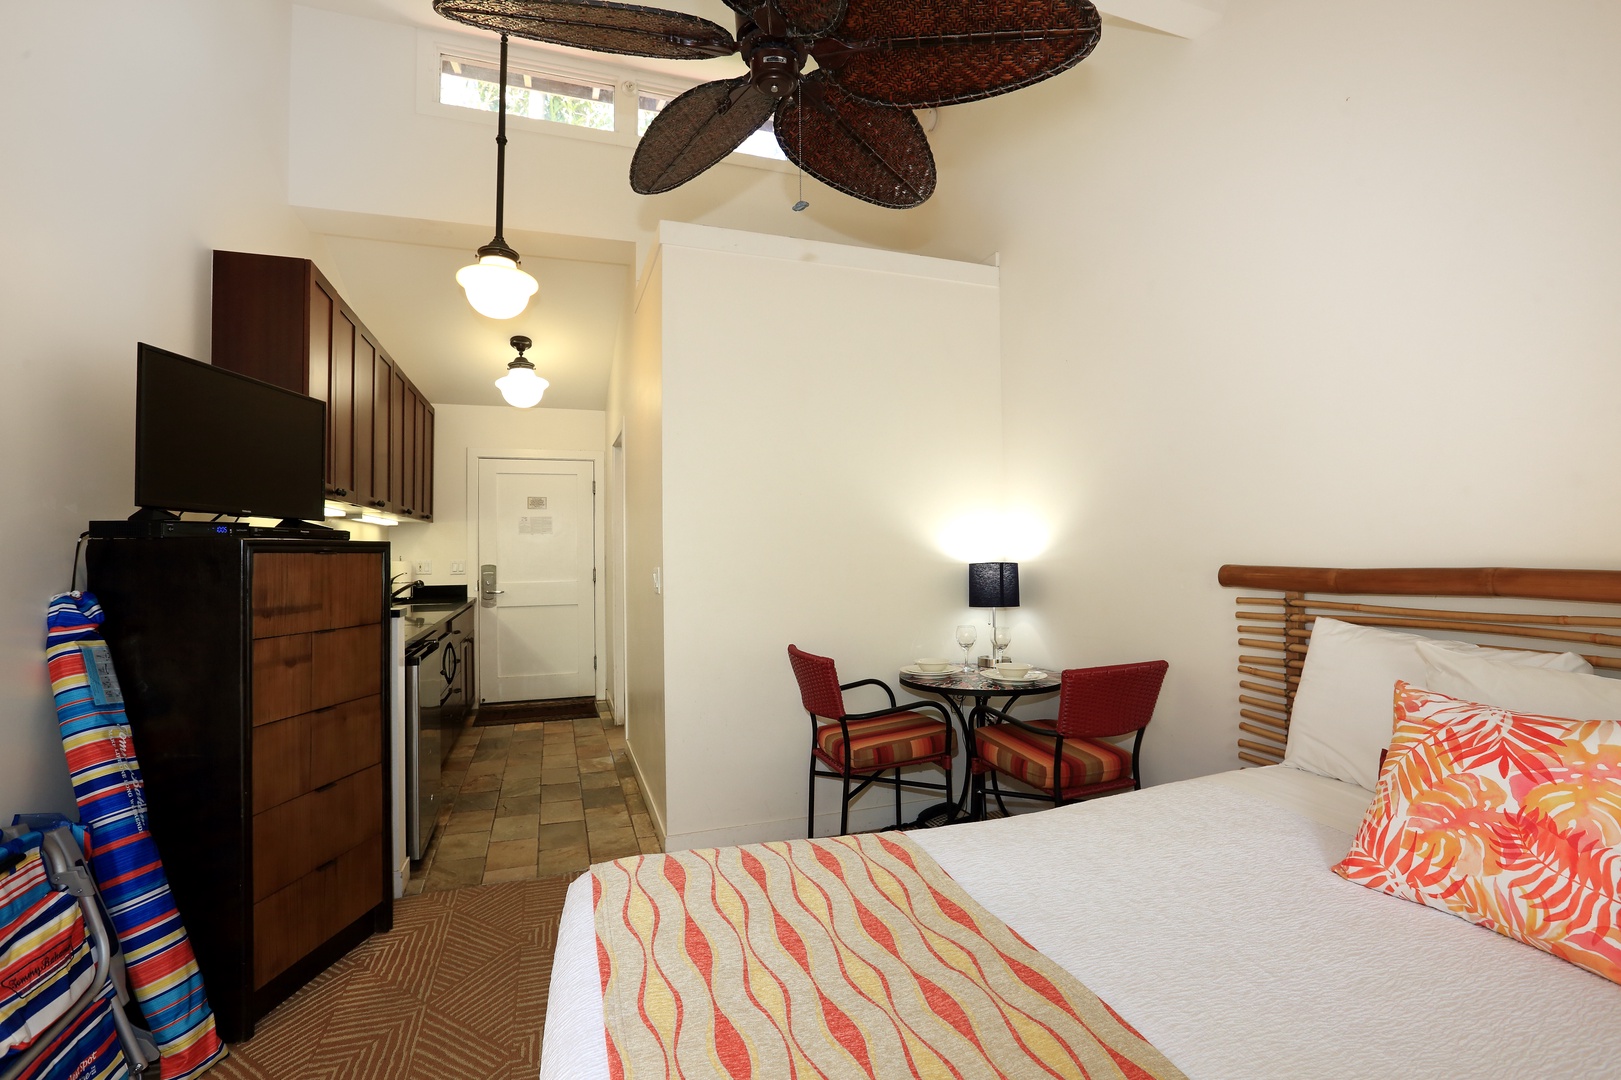 Lahaina Vacation Rentals, Aina Nalu F201 - High ceilings with natural light at this tropical resort